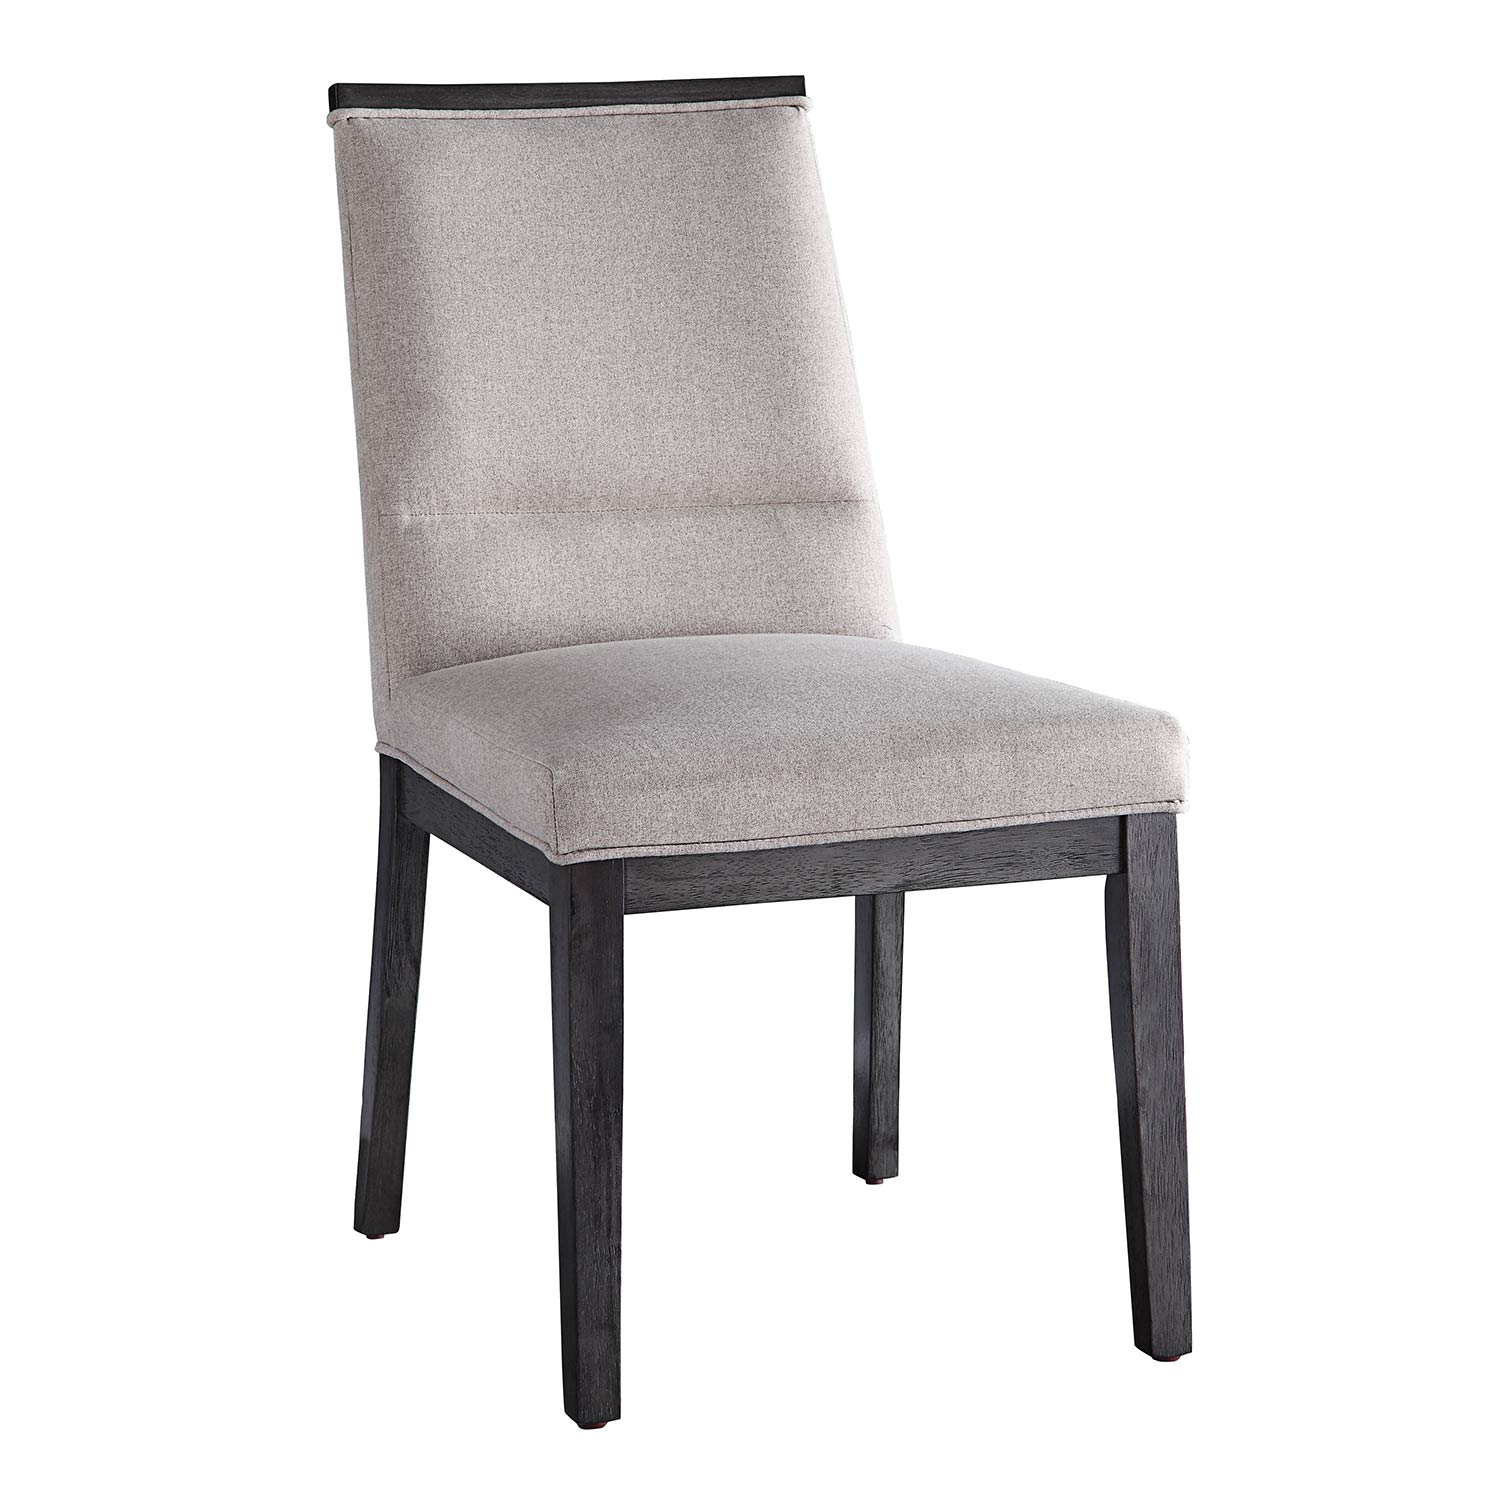 Homelegance Standish Side Chair - Gray